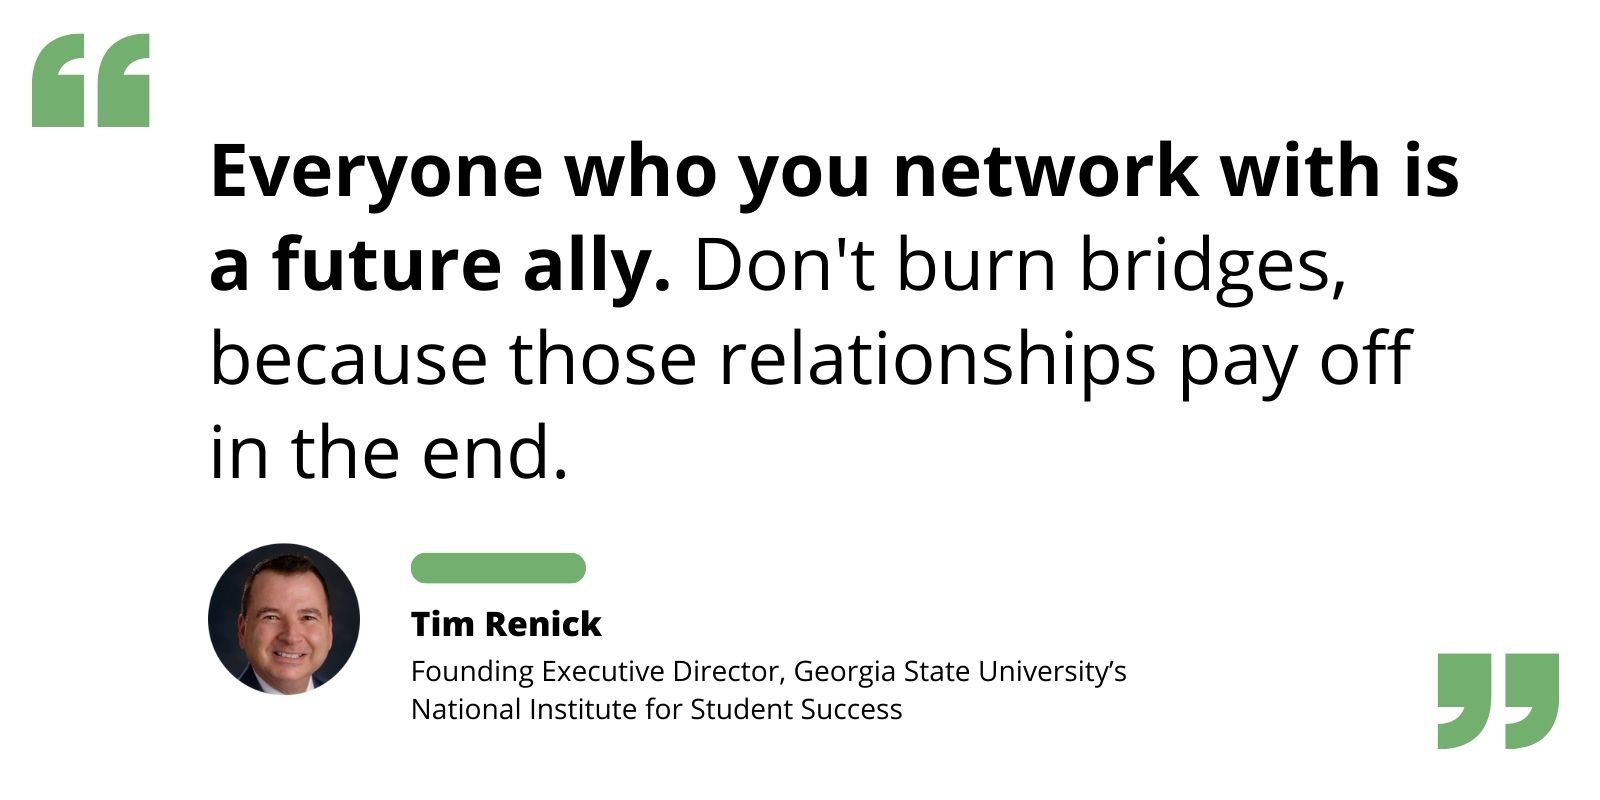 Quote by Tim Renick re: not burning bridges because every professional relationship pays off.